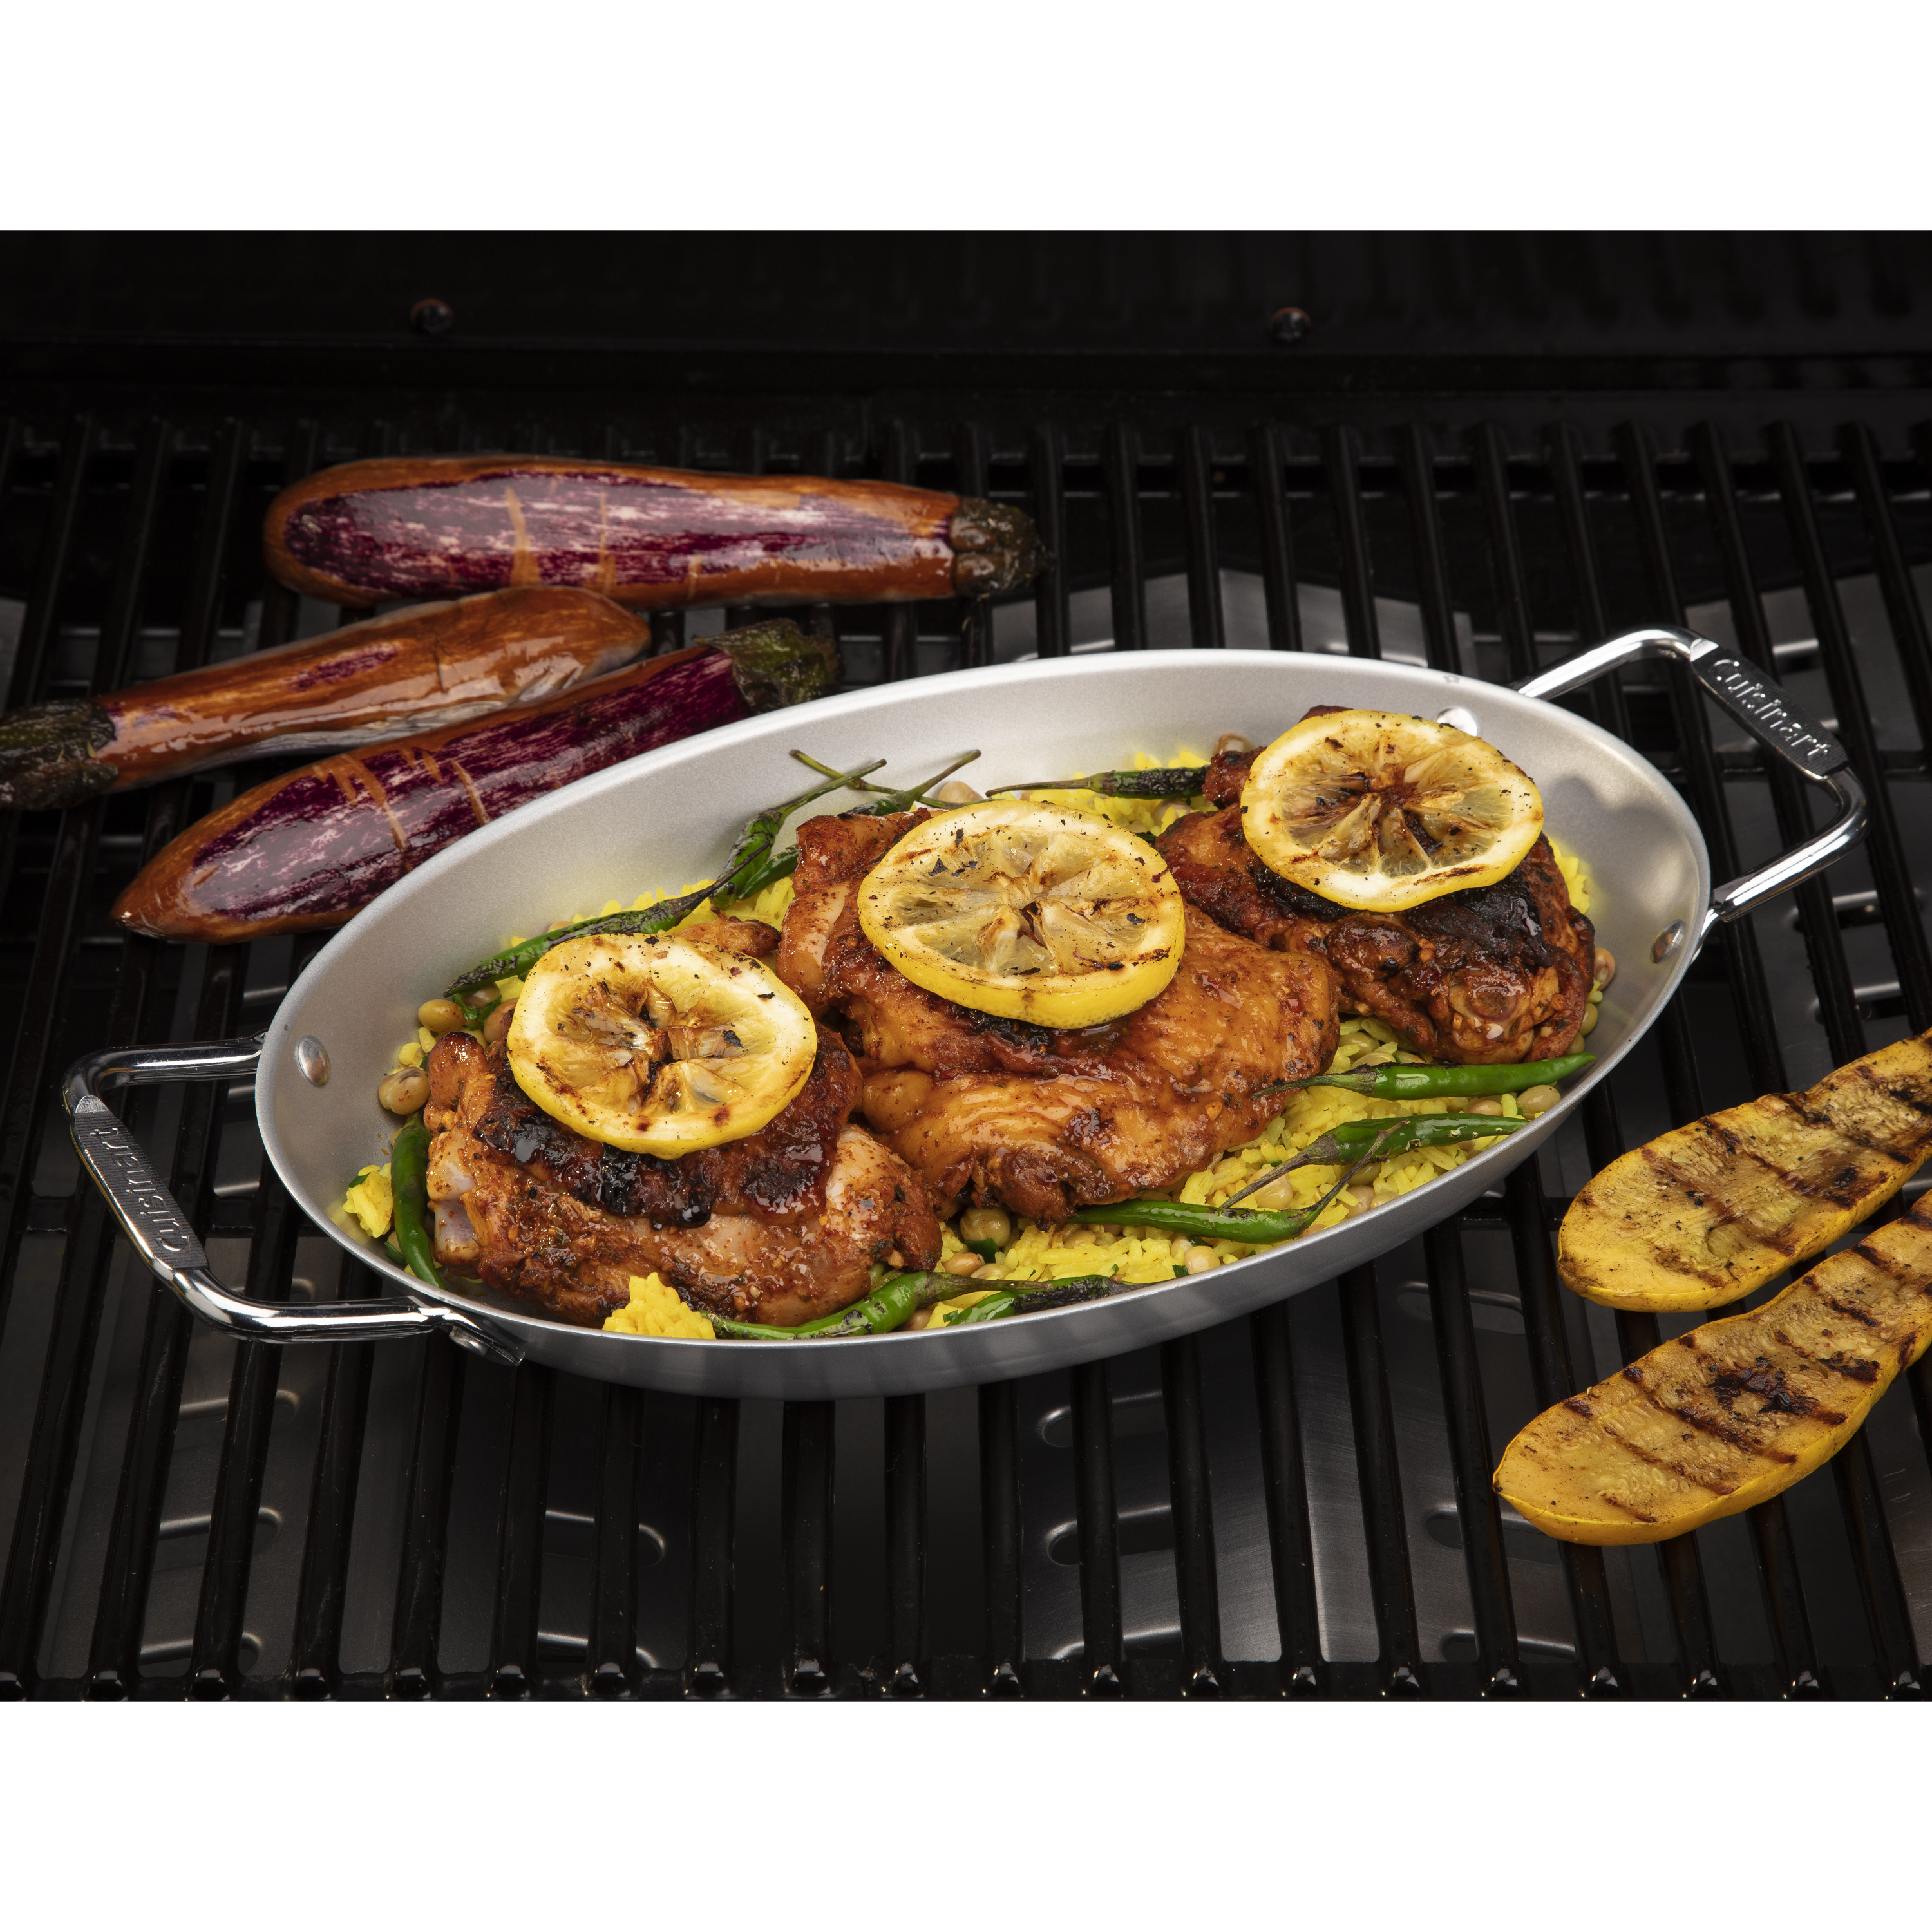 13" x 8" Non-Stick Oval Grilling Pan